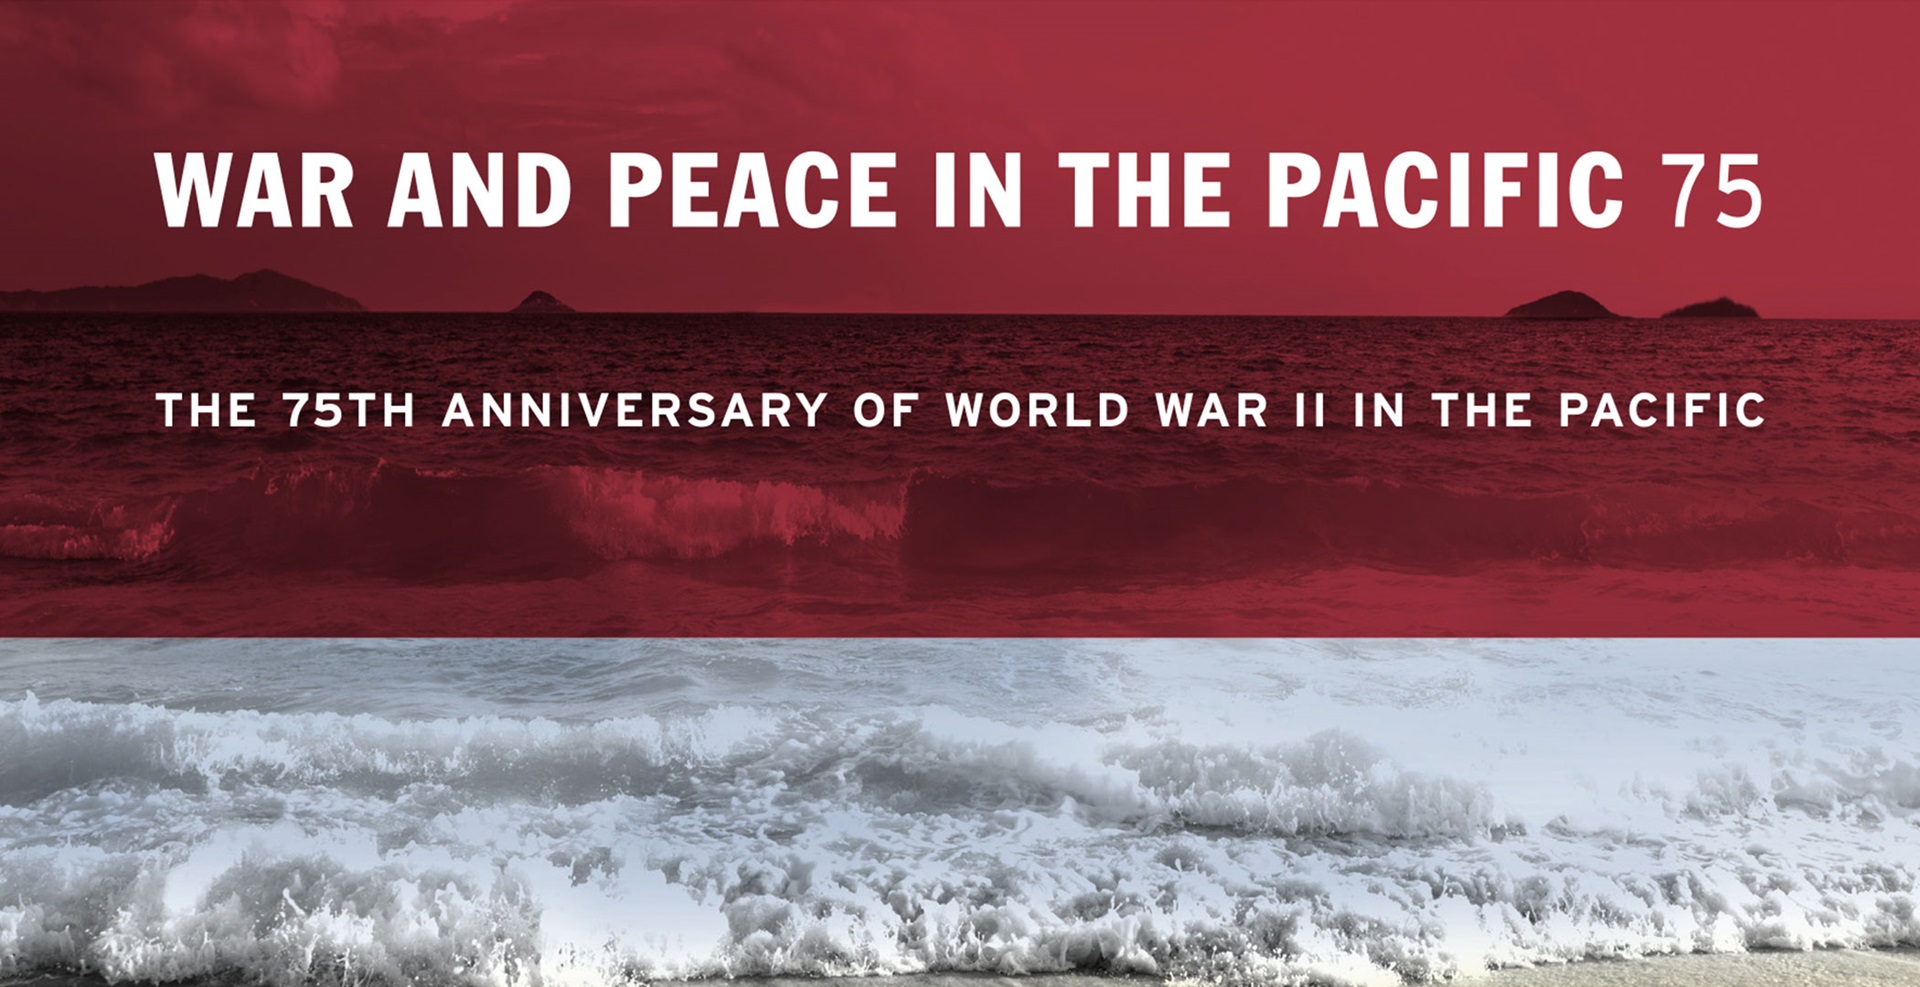 War and Peace in the Pacific 75: The 75th anniversary of World War II in the Pacific